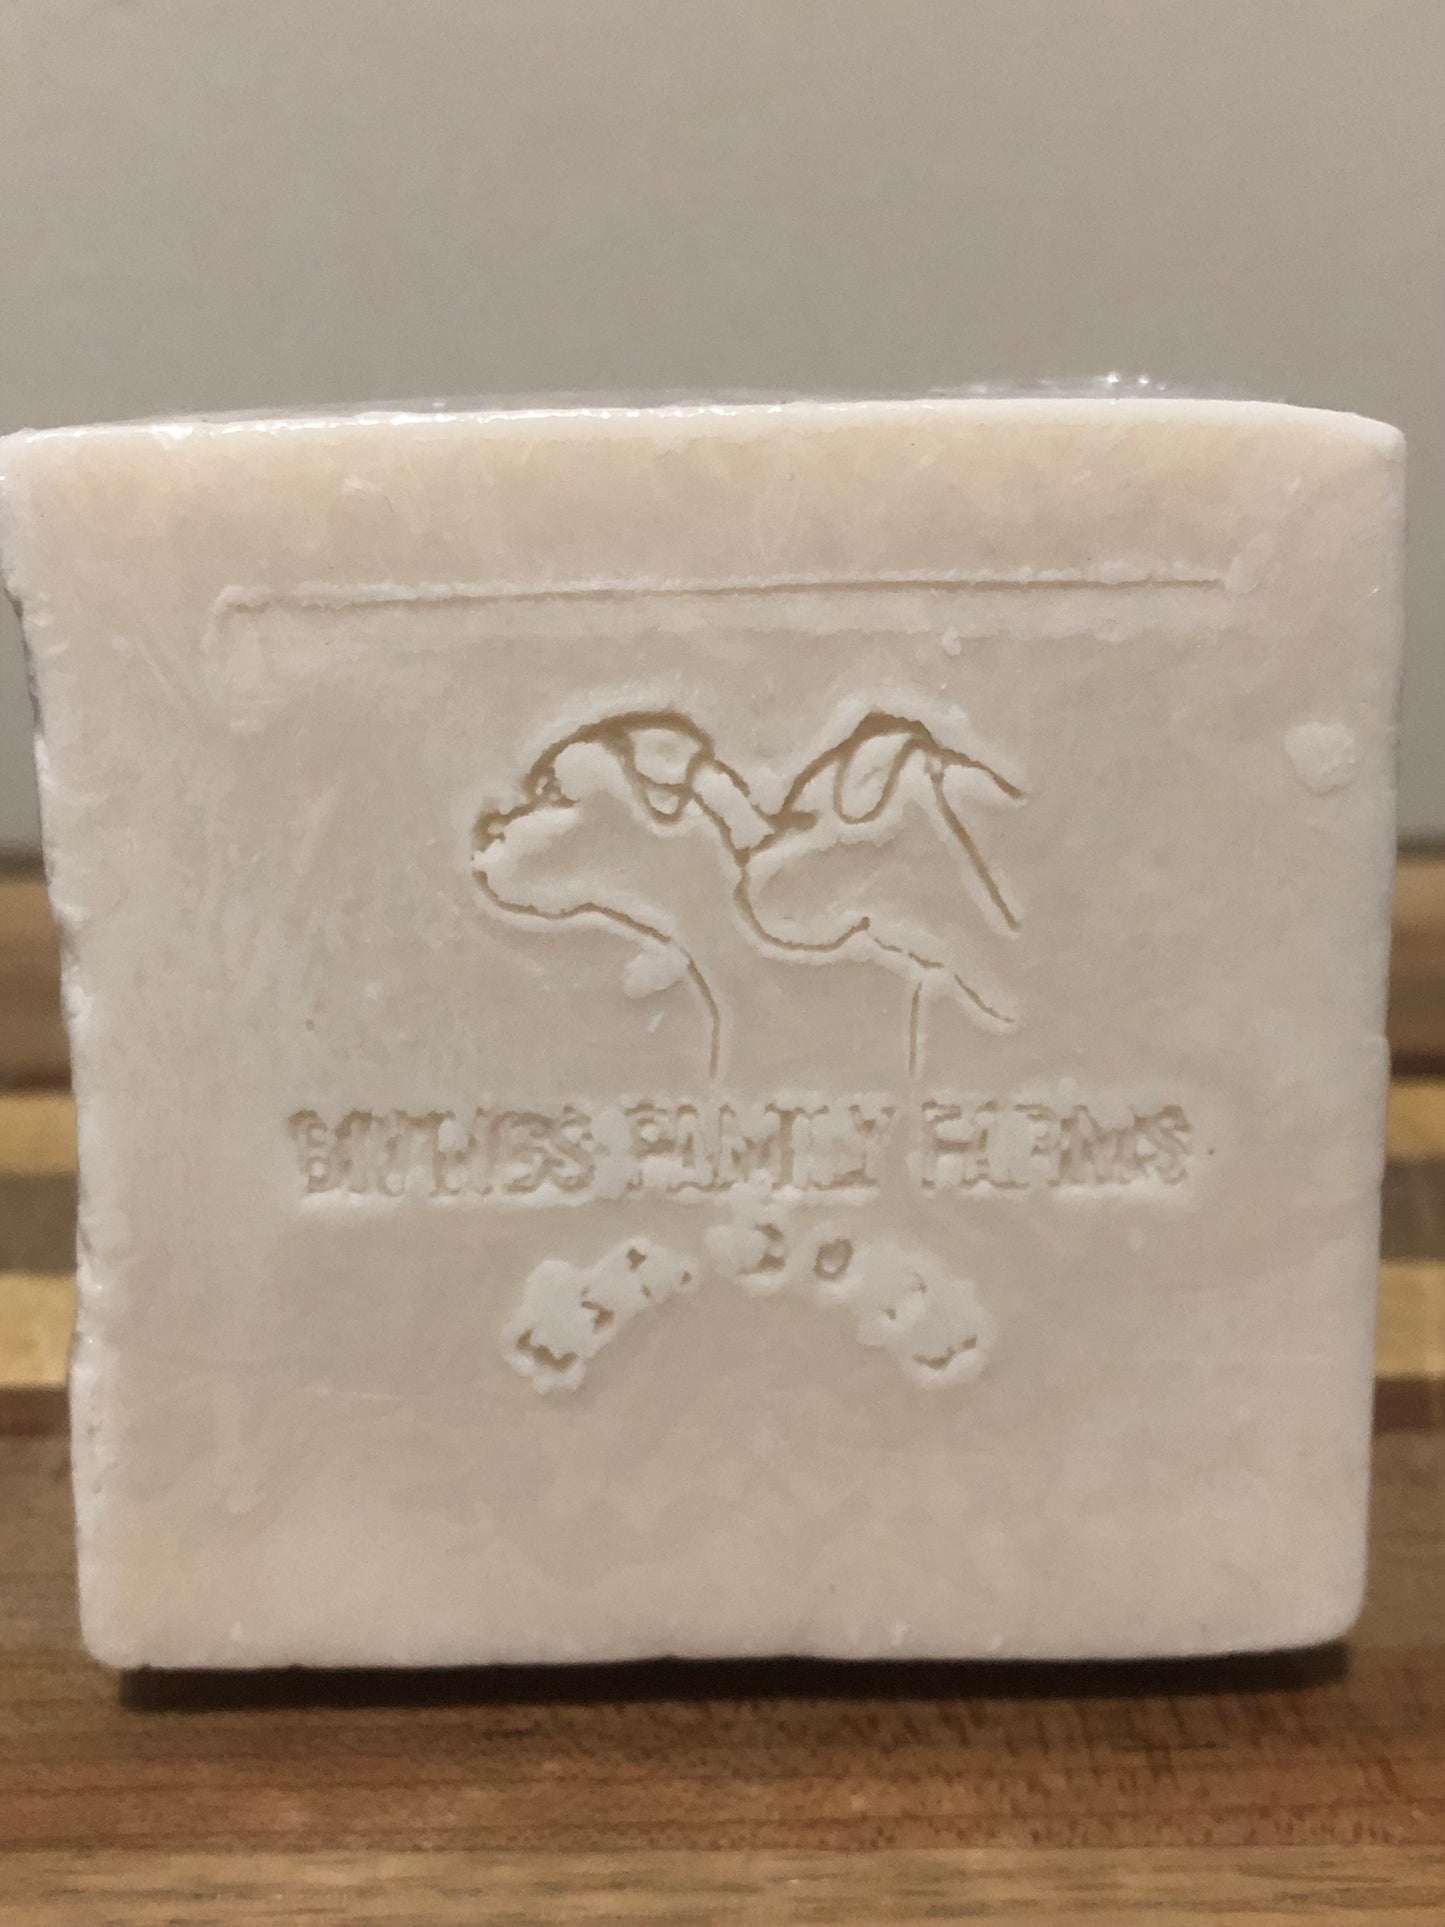 Rocky's Gunpowder Scented Goat's Milk, Hemp Seed Oil and East African Shae Butter Soap